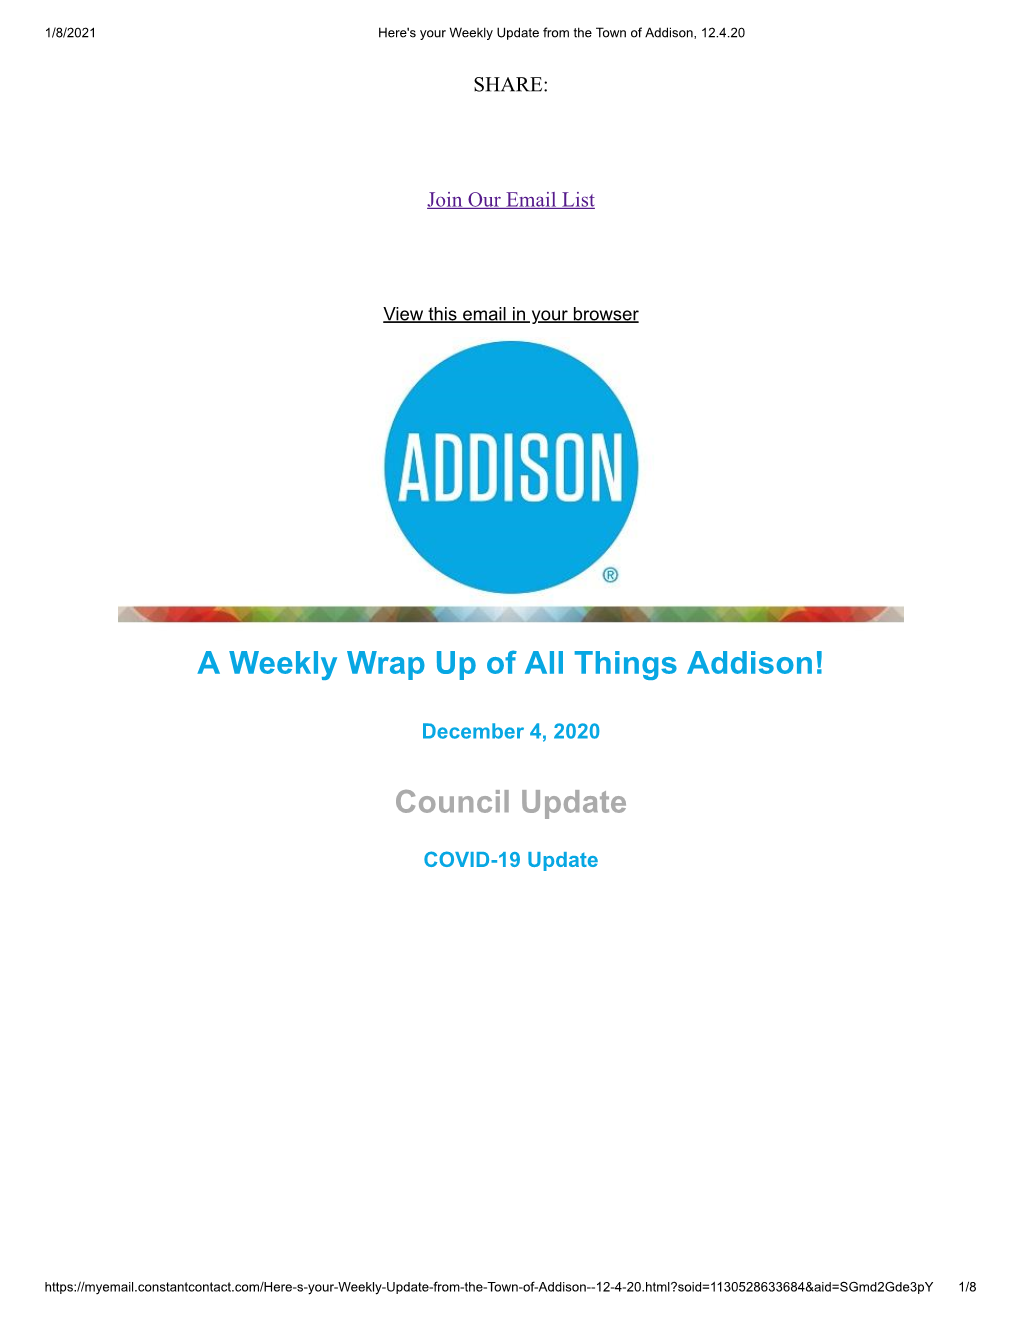 A Weekly Wrap up of All Things Addison! Council